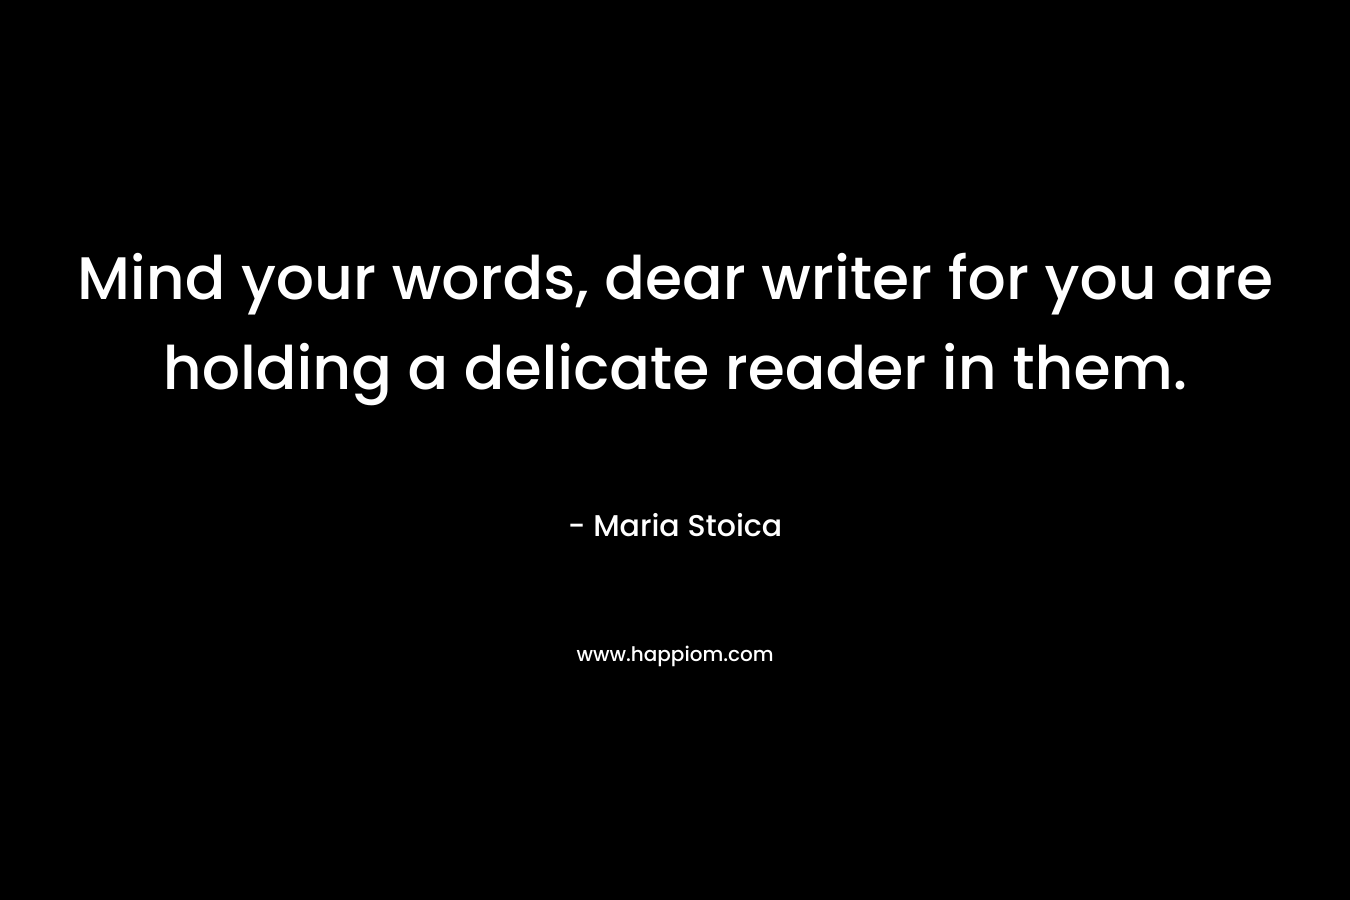 Mind your words, dear writer for you are holding a delicate reader in them.